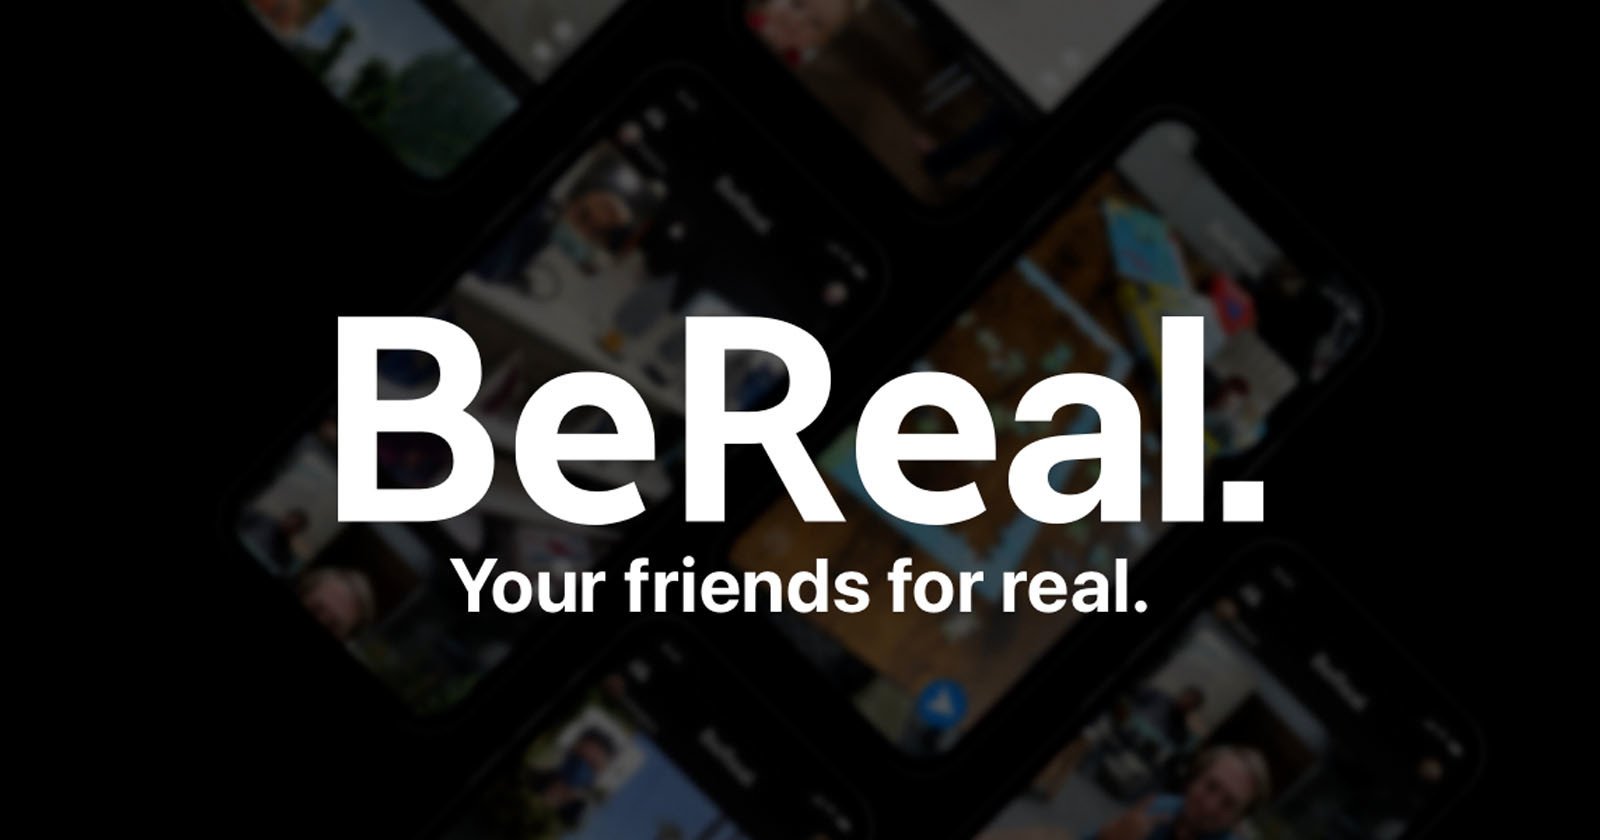  bereal may start adding paid features photo-sharing 